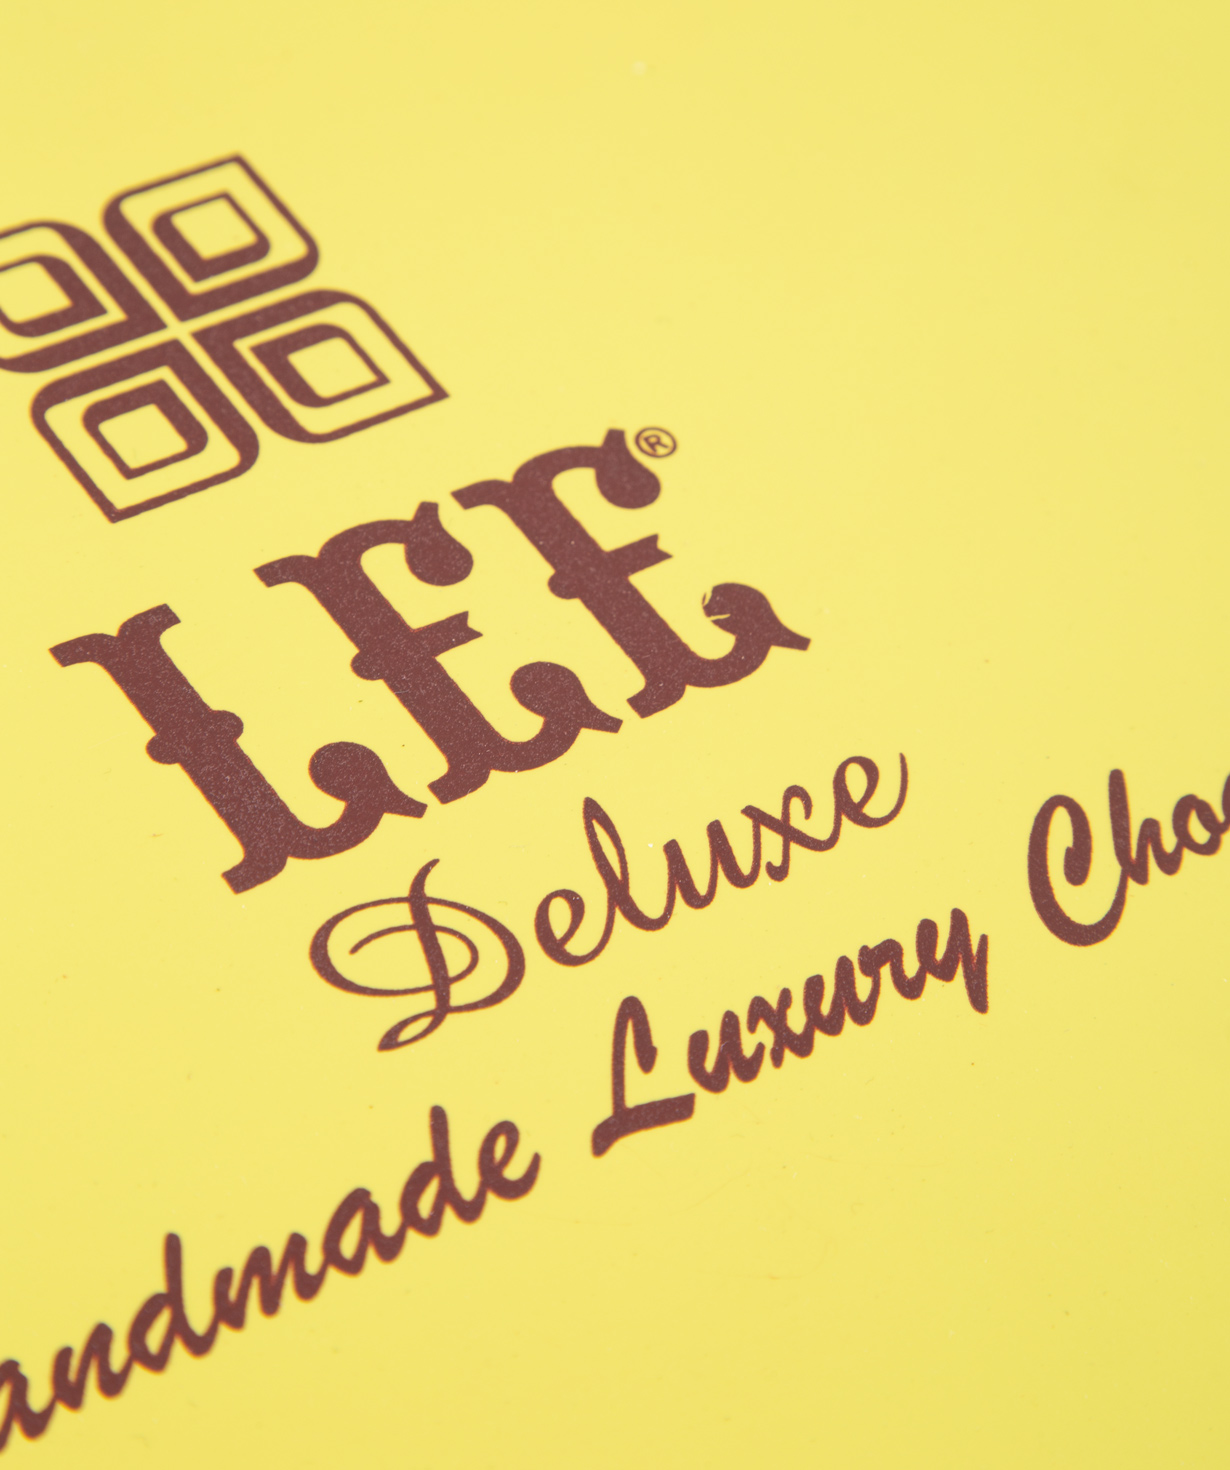 Collection `Lee Deluxe` in a wooden box, yellow